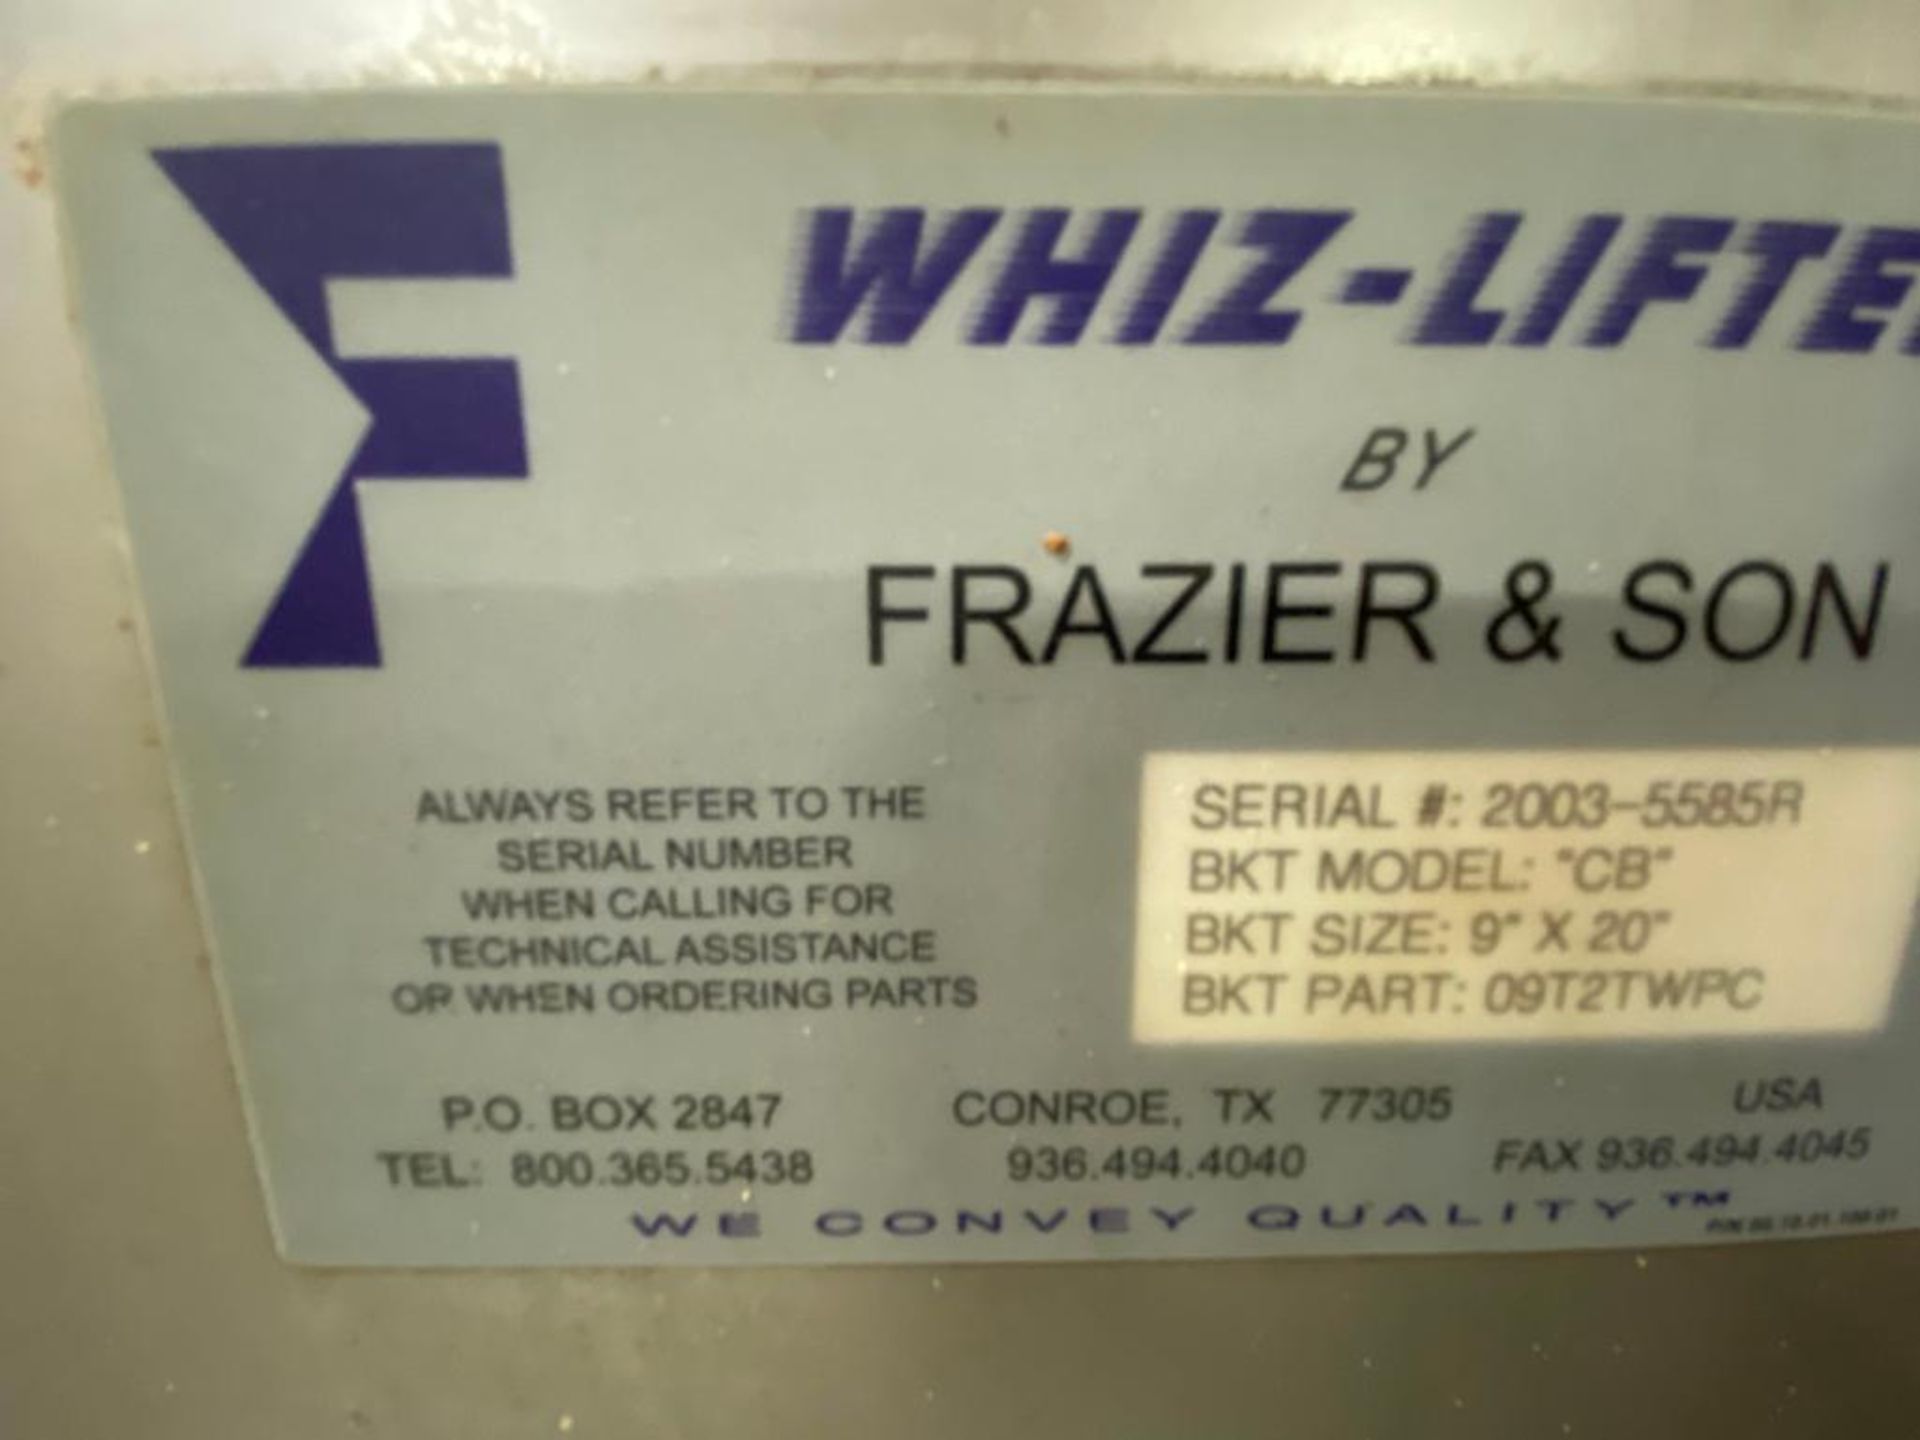 Frazier and Son Whiz-Lifter stainless steel overlapping bucket elevator - Image 3 of 7